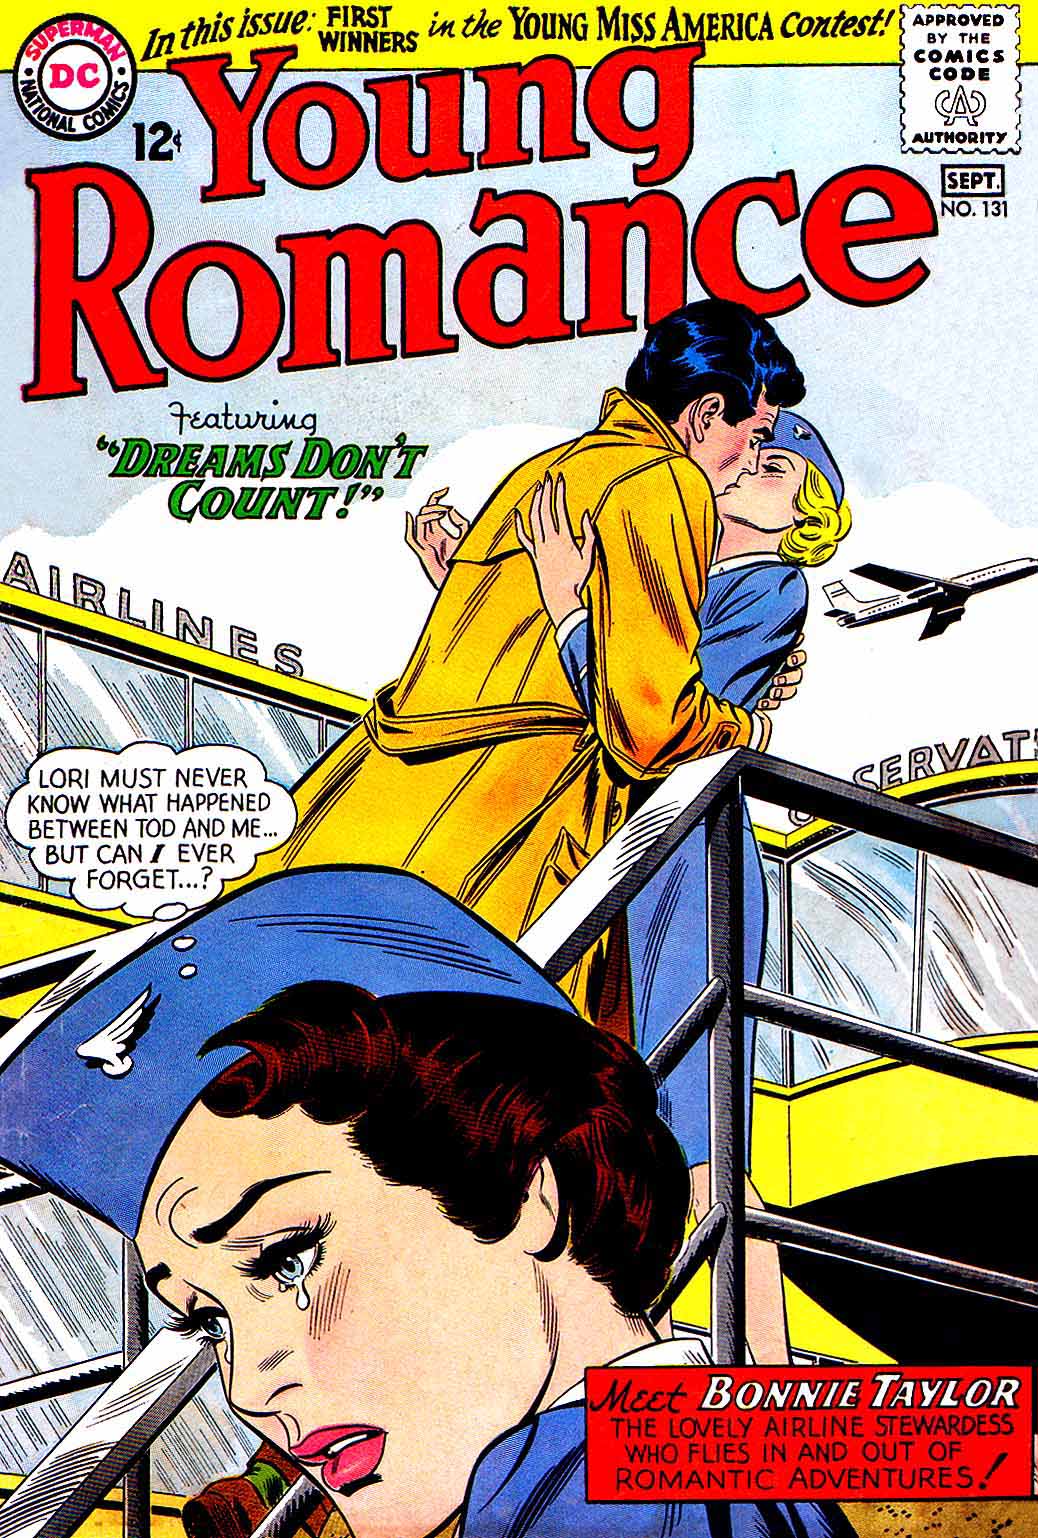 Read online Young Romance comic -  Issue #131 - 1